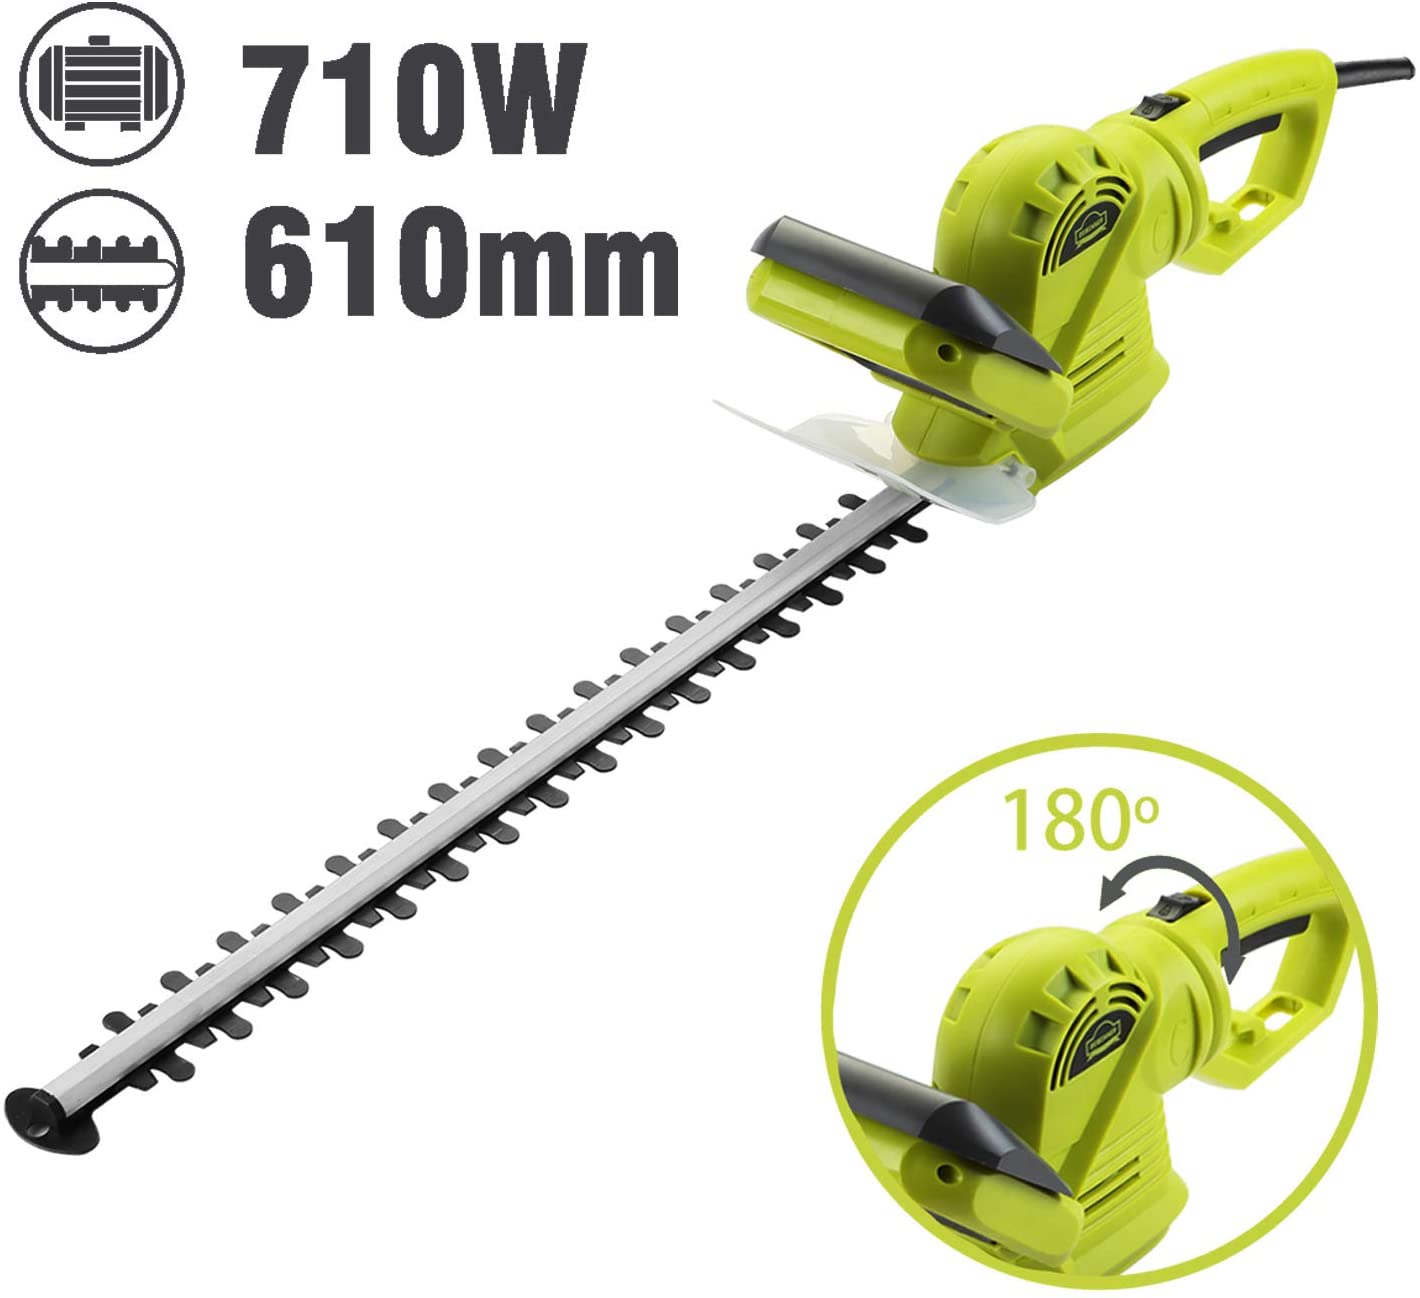 DEWINNER Hedge Trimmer, Electric Cutter, 61CM/24'' Blade Length with Cover, 24mm Tooth Opening Cutting Capacity 710W